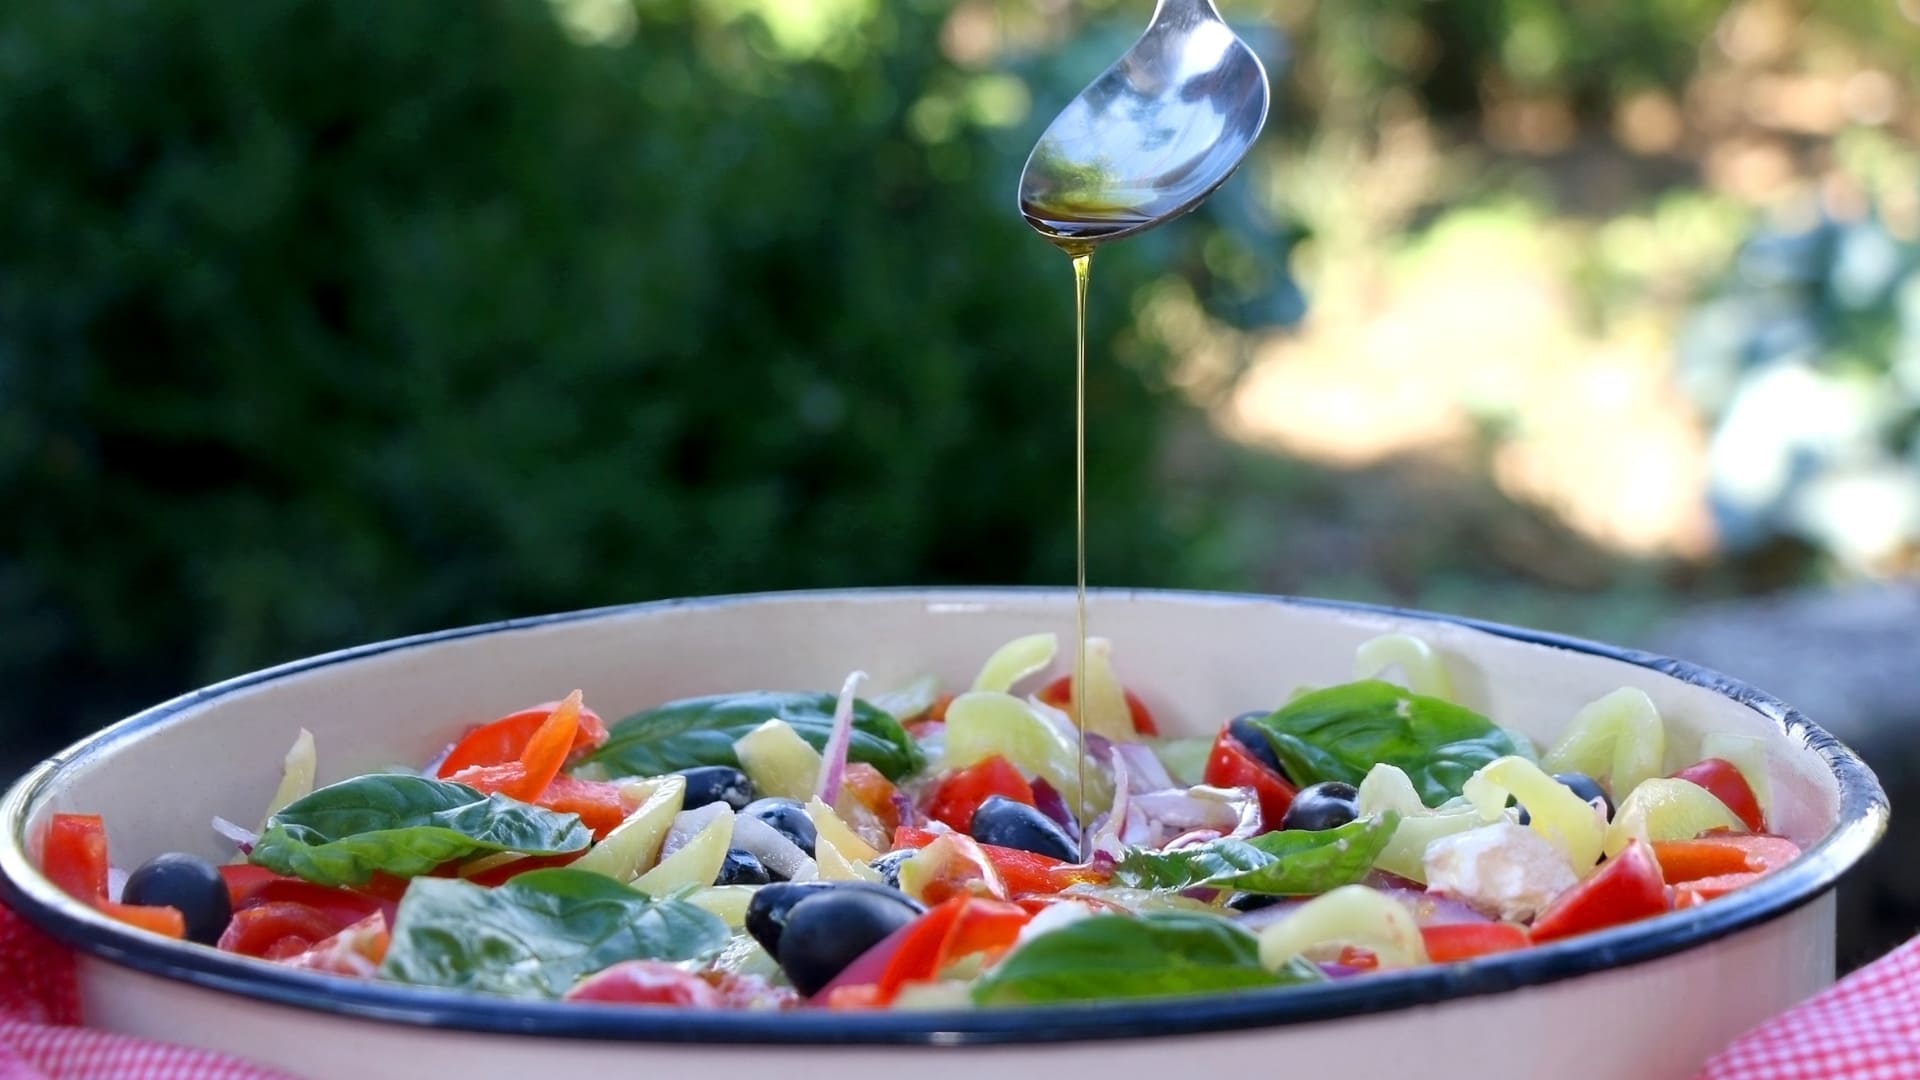 Experience the Taste of Greece with This Classic Greek Salad Recipe - Healthy, Fresh, and Bursting with Flavor!4